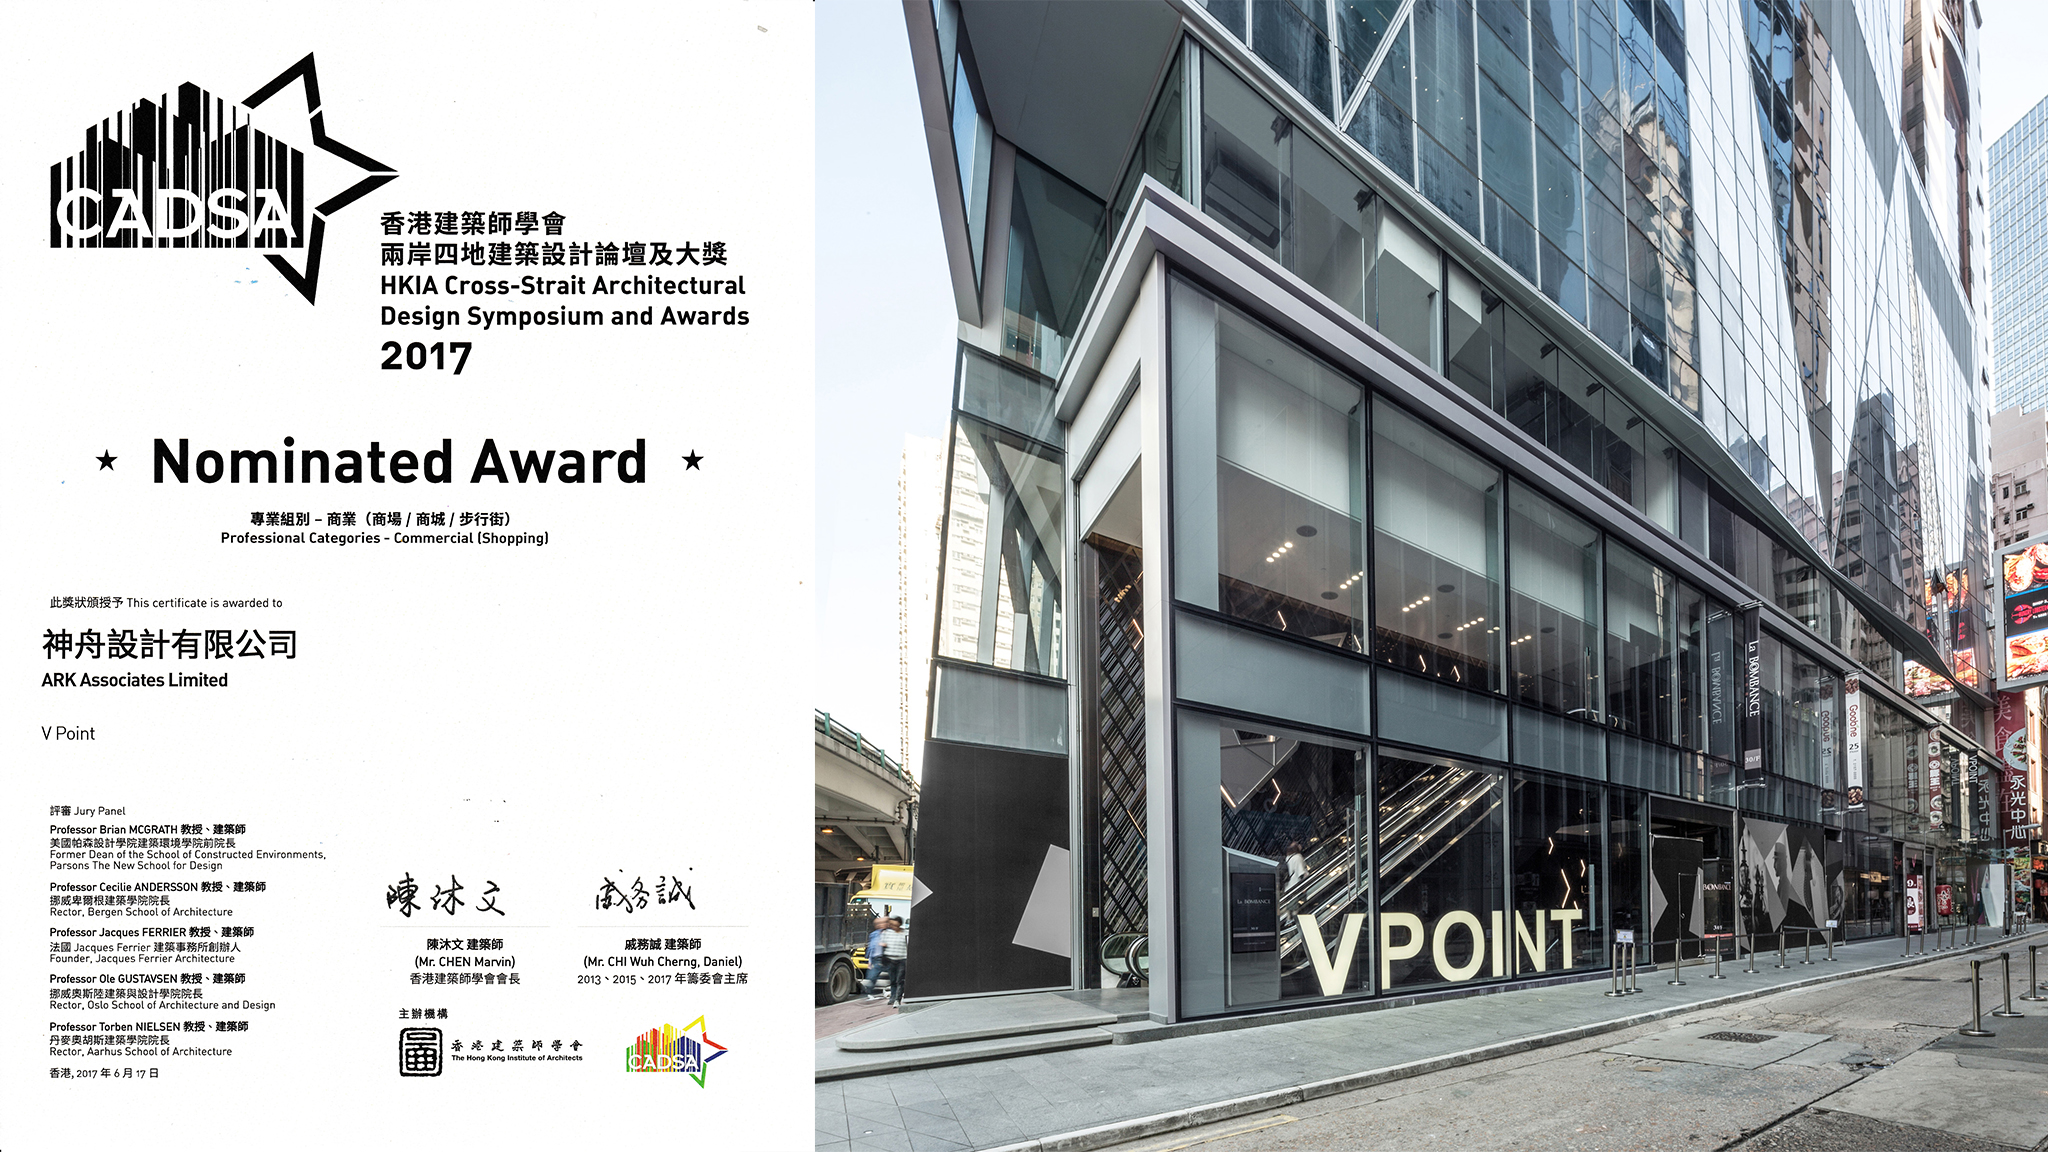 HKIA Cross-Strait Architectural Design Symposium and Awards 2017